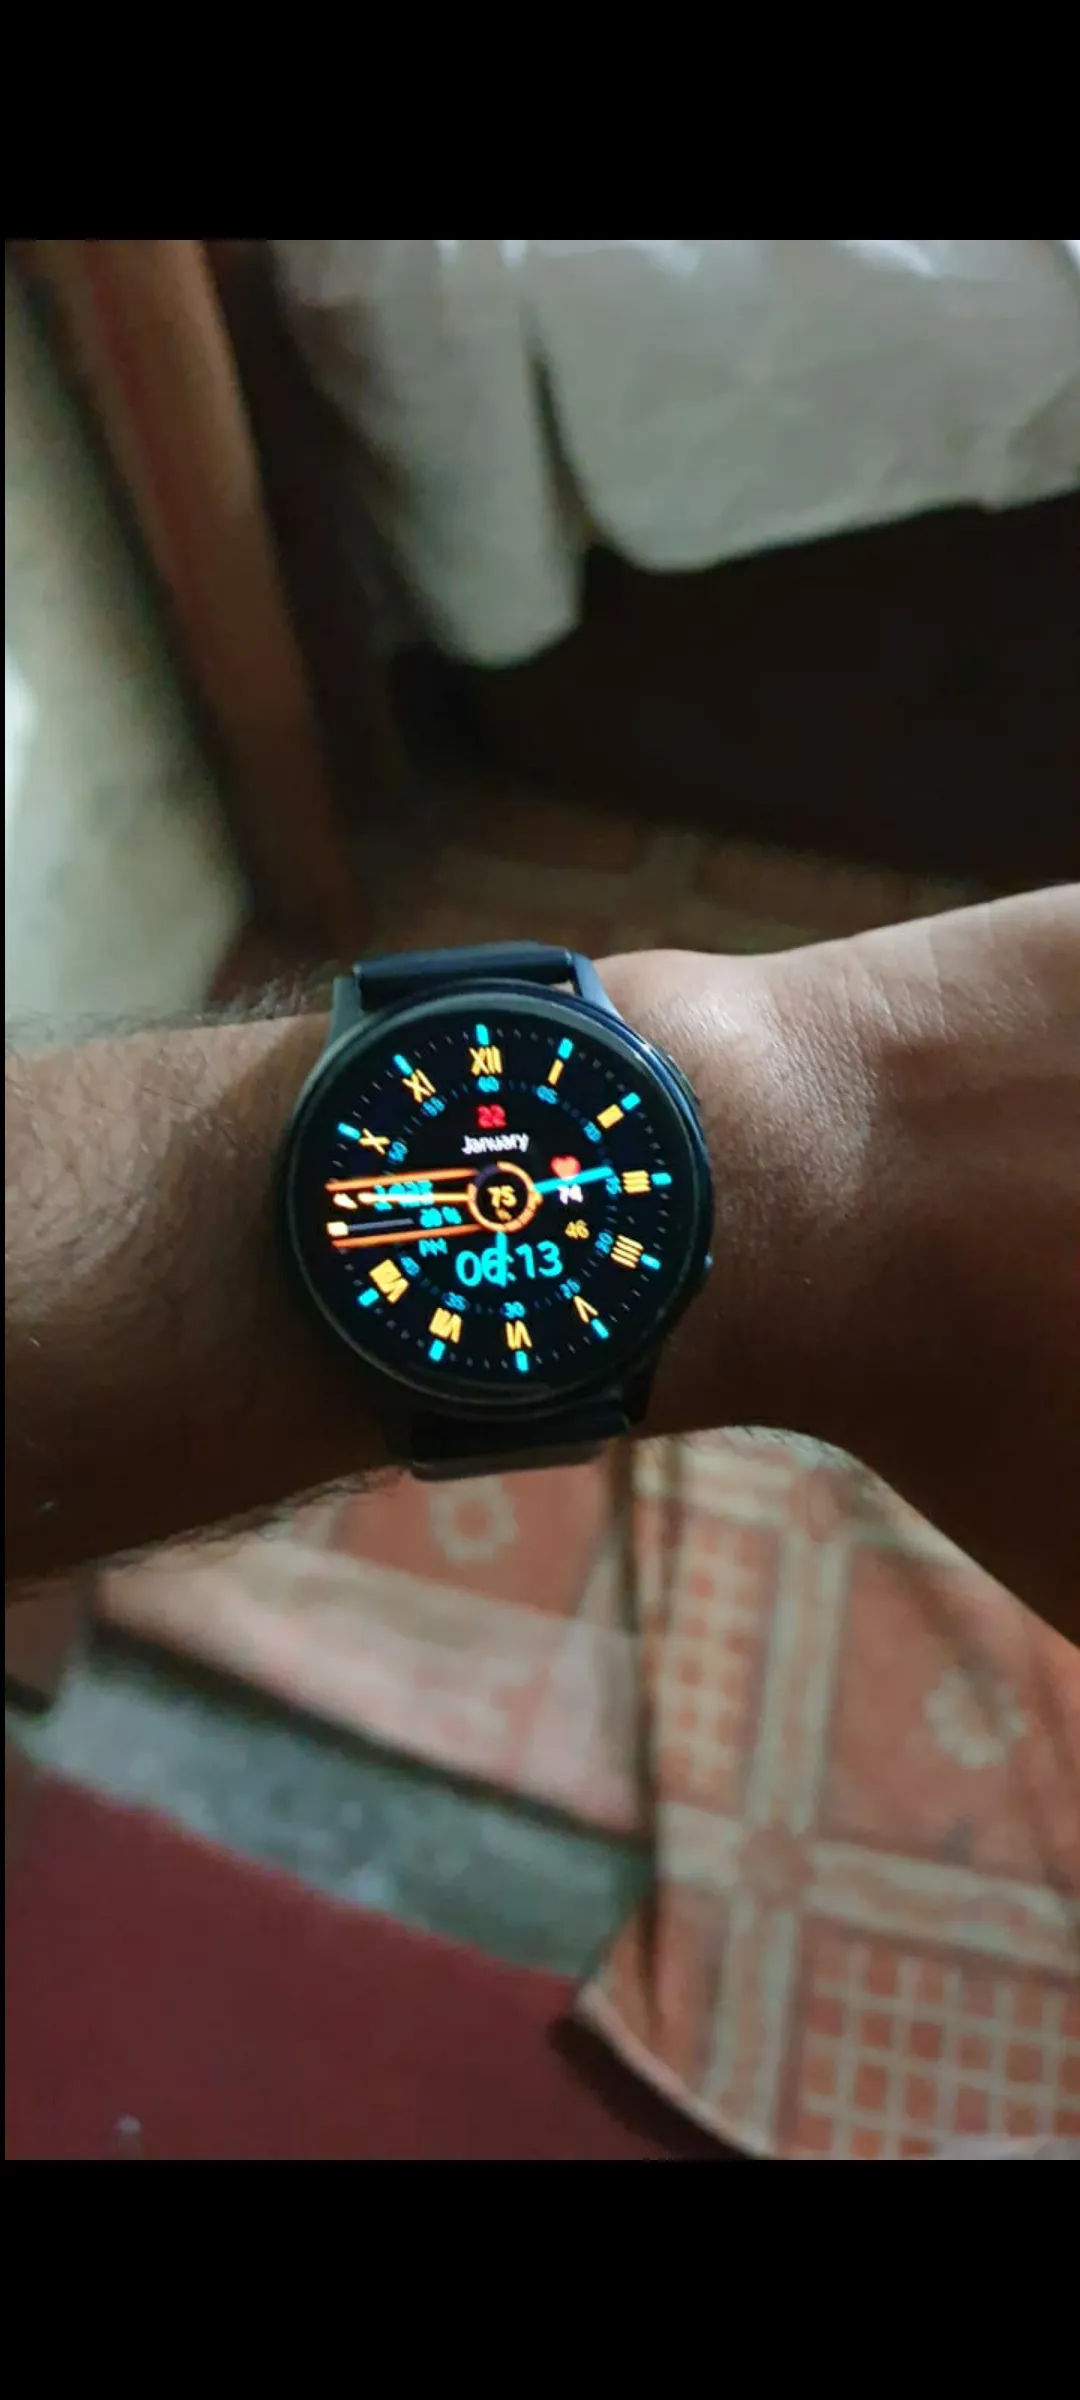 Samsung s9 plus and Samsung active watch 2 40mm - photo 1